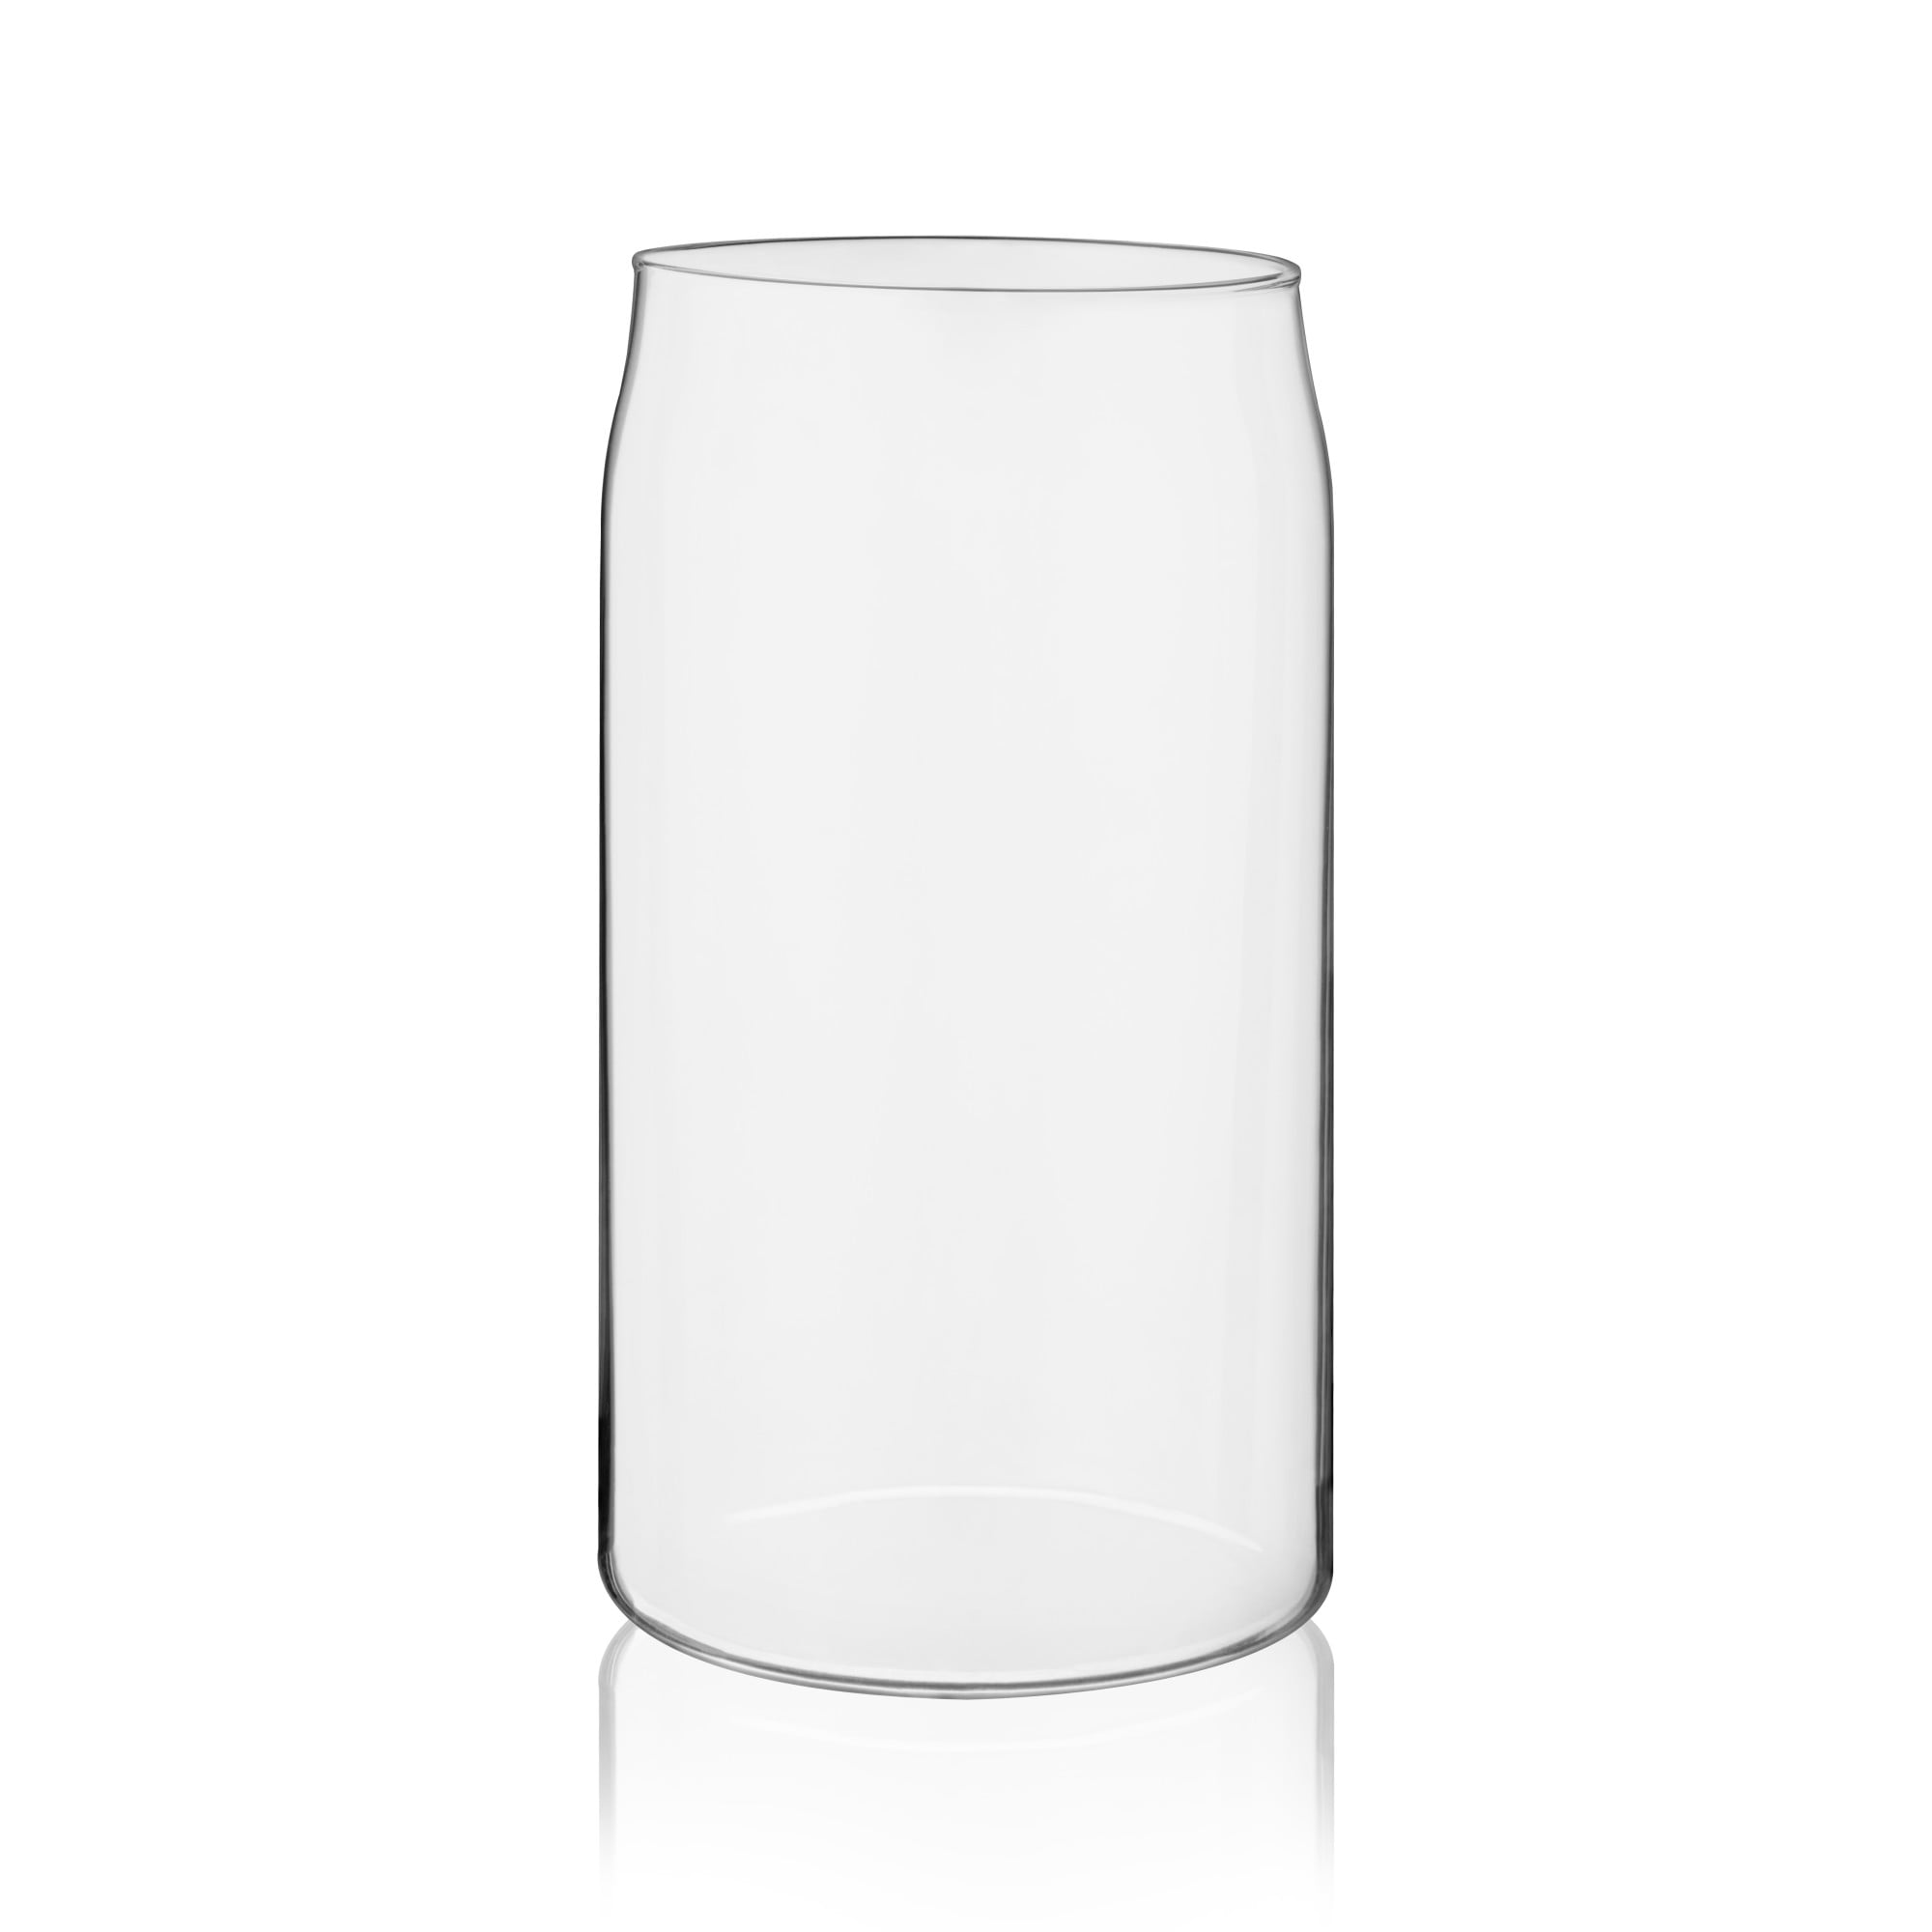 16 Ounce Beer Glasses, Set Of 6 Tin Can Shaped Pint Glasses - Wide Rim,  Dishwasher Safe, Clear Crystal Glass Novelty Drinking Glasses, Lead Free,  For Beers, Ales, Or Cocktails - Restaurantware